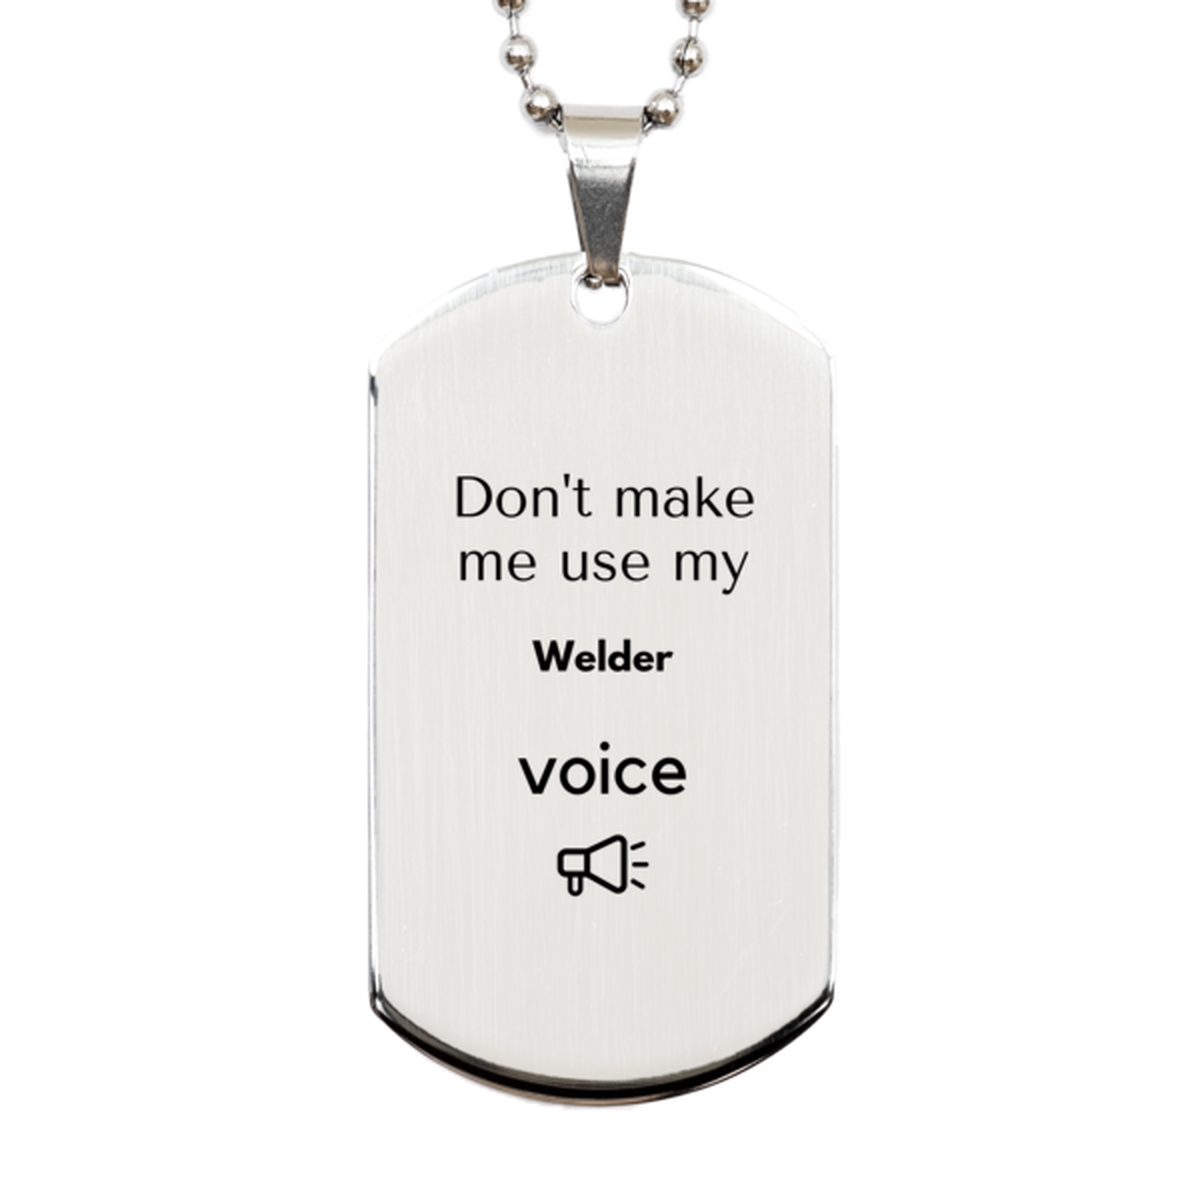 Don't make me use my Welder voice, Sarcasm Welder Gifts, Christmas Welder Silver Dog Tag Birthday Unique Gifts For Welder Coworkers, Men, Women, Colleague, Friends